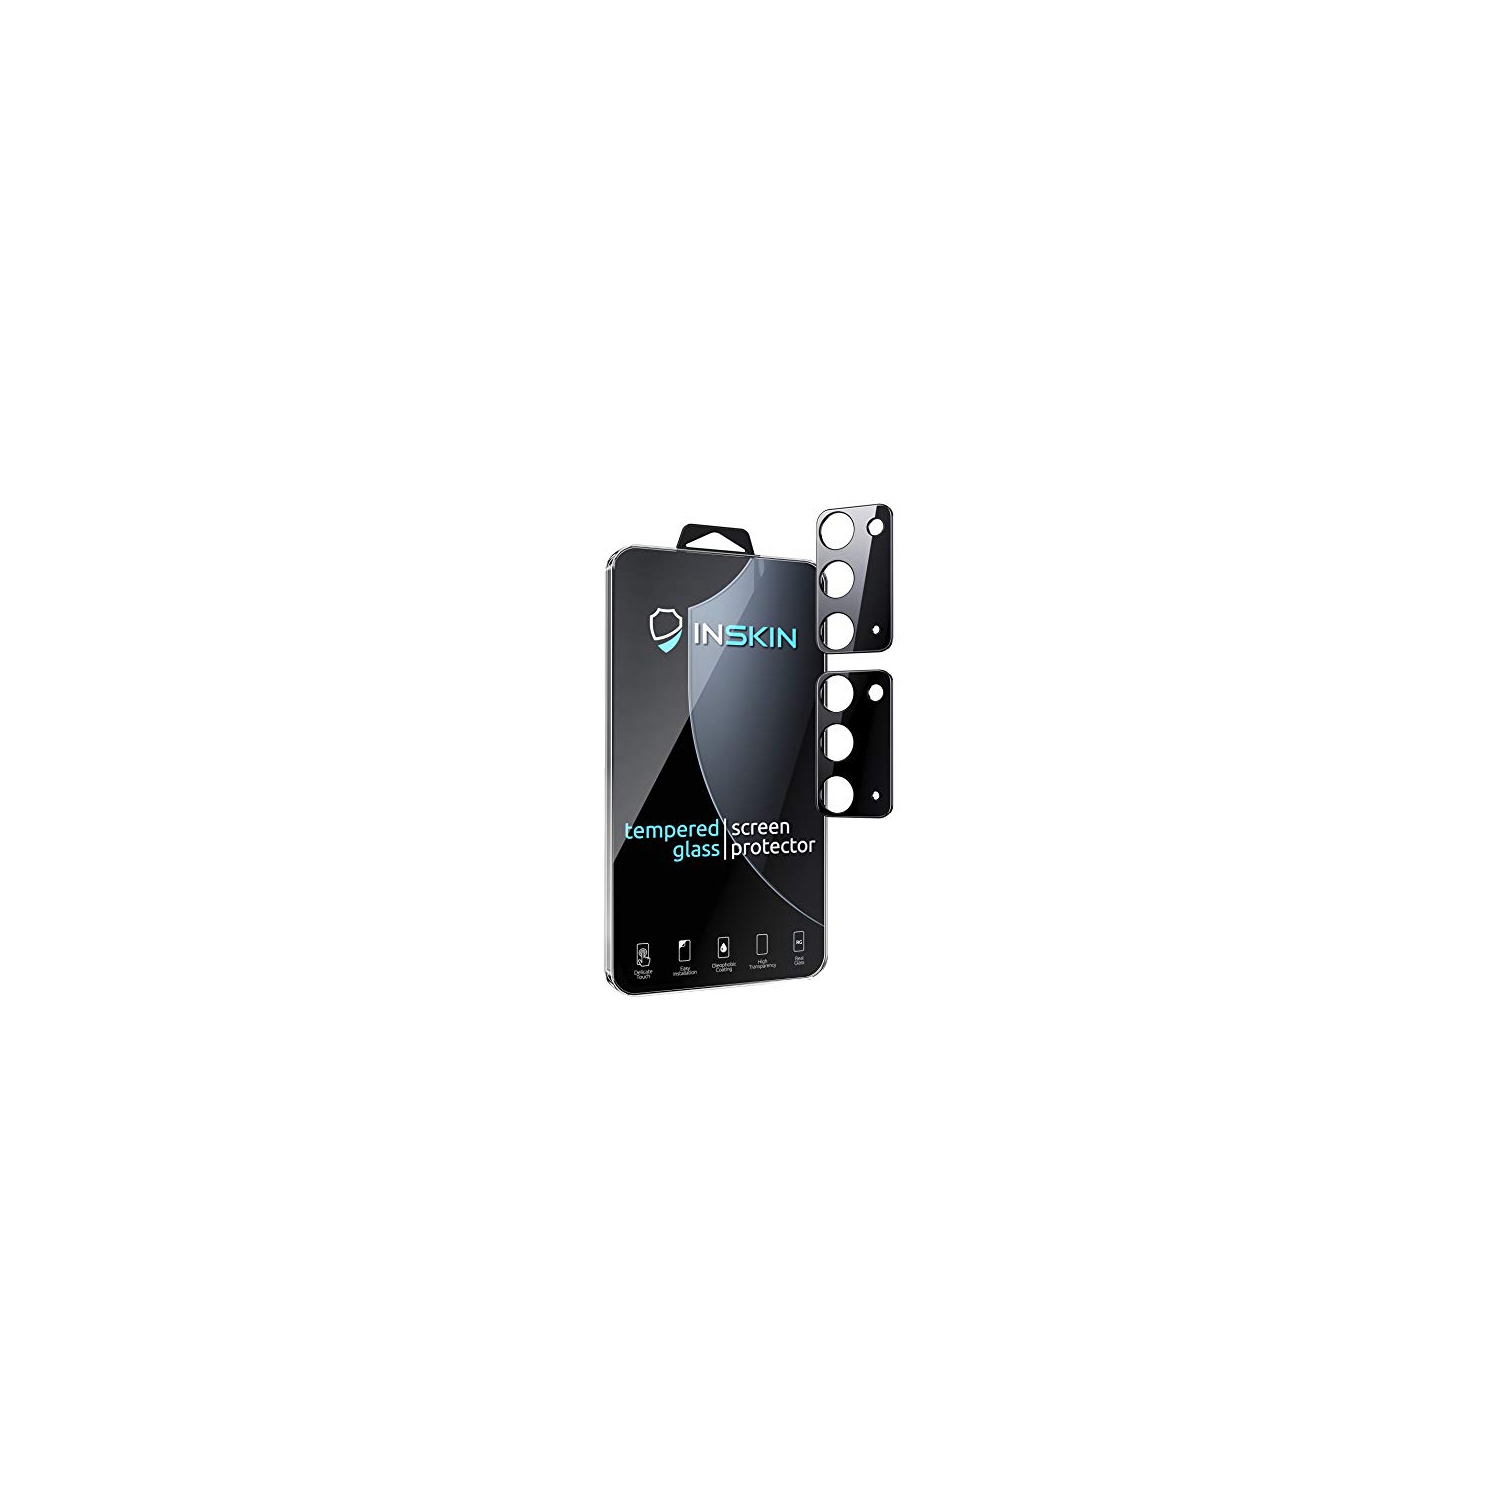 Inskin Tempered Glass Camera Lens Protector for Samsung Galaxy Note 20 4G/5G 6.7 inch [2020]. Jet-Black. 2-Pack.